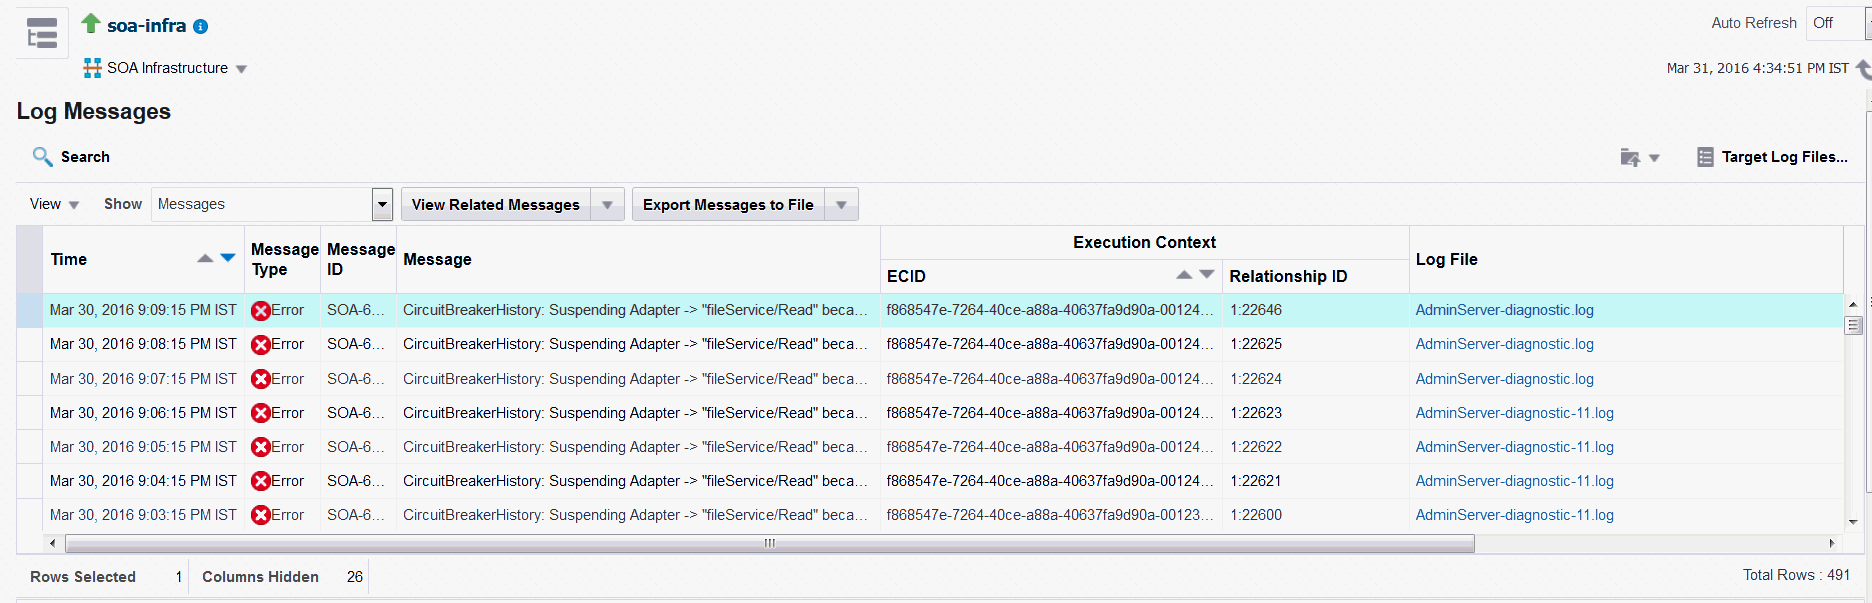 Log Messages page